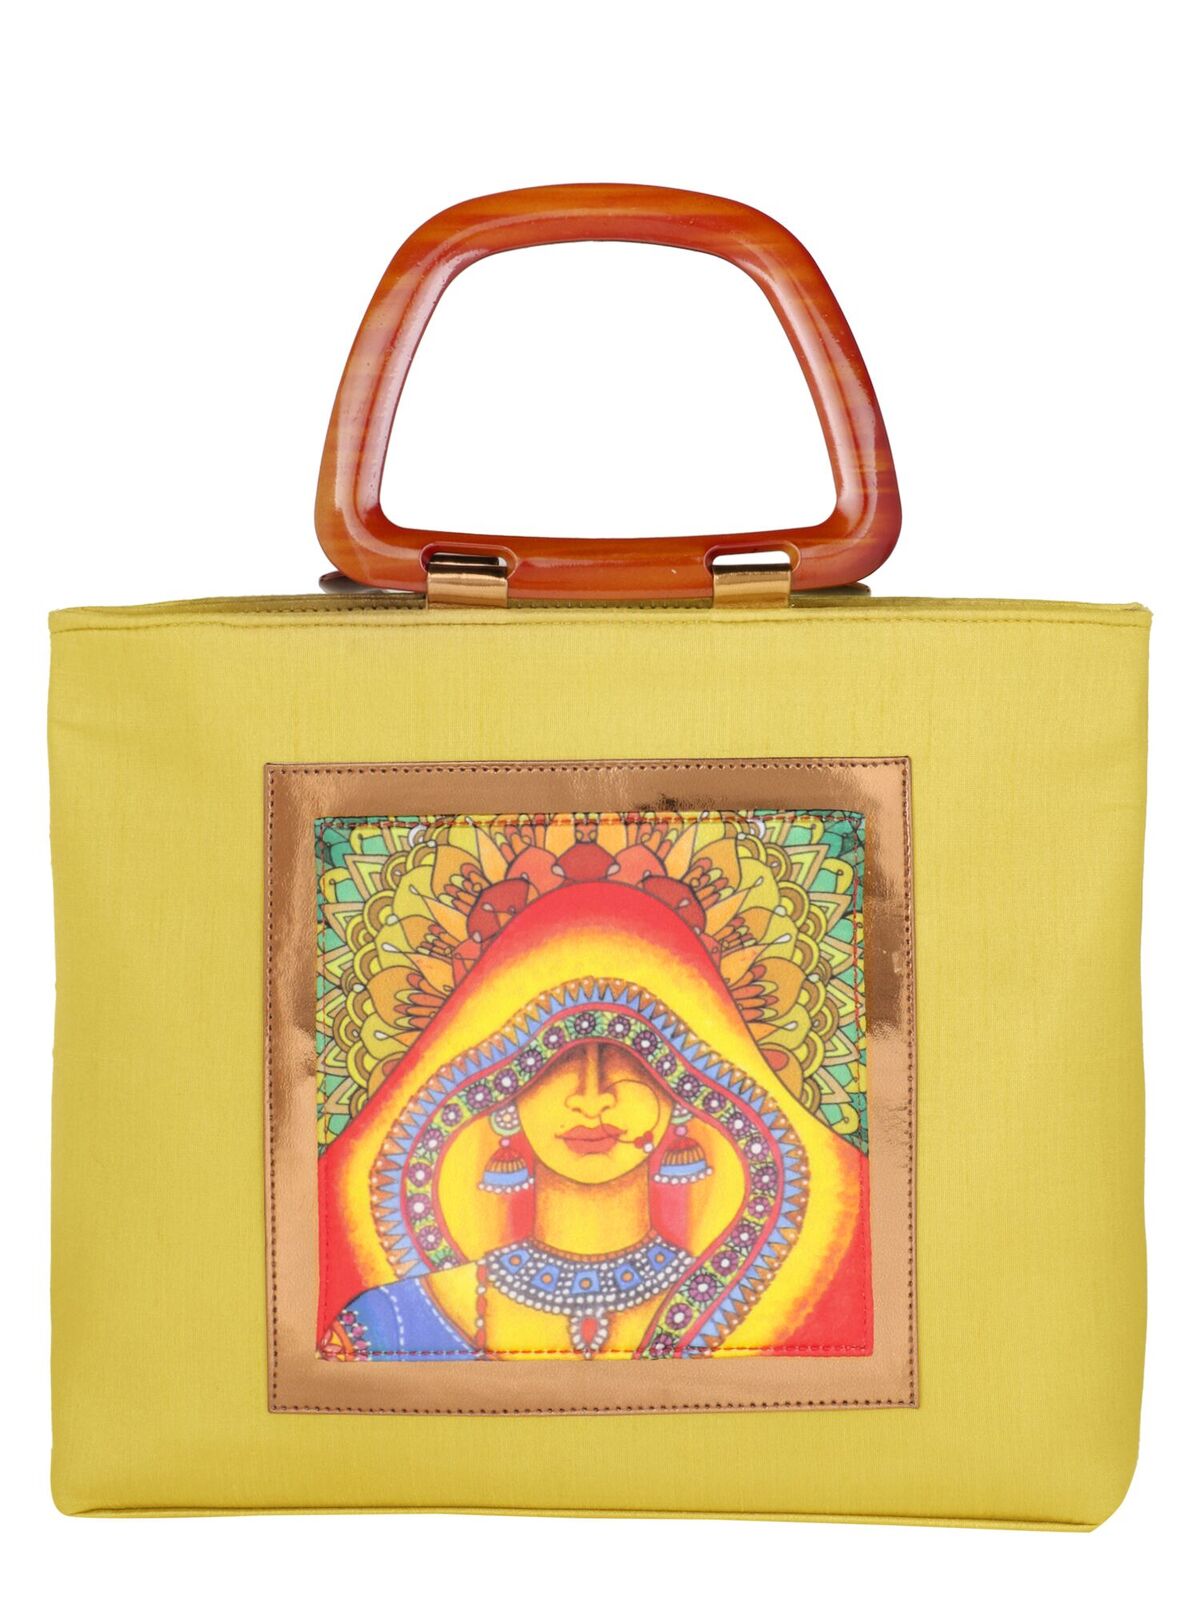 Buy ALL THINGS SUNDAR - Ethnic Collections of Bags - Wallets and clutches -  Multicolour Online @ ₹550 from ShopClues